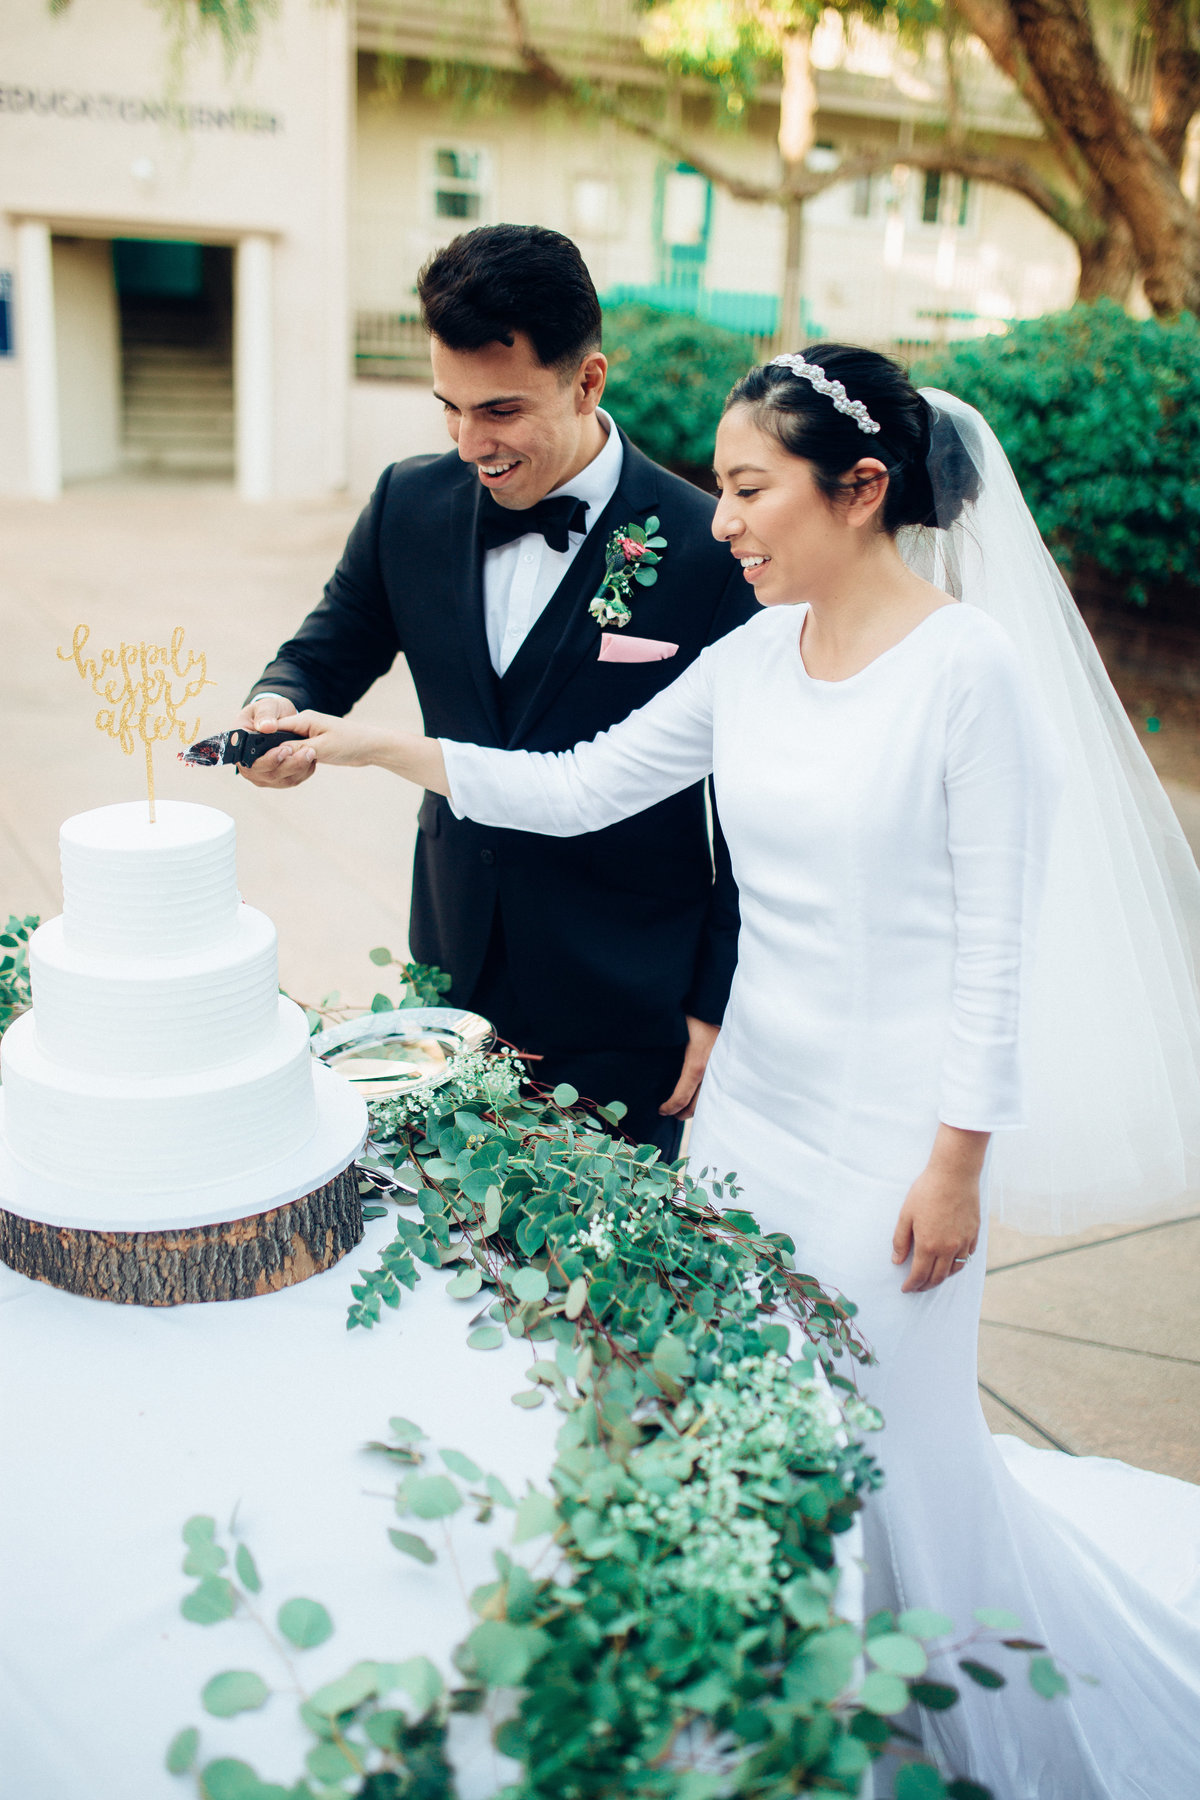 Close Up Wedding Photography of Couple Cutting Cake In California